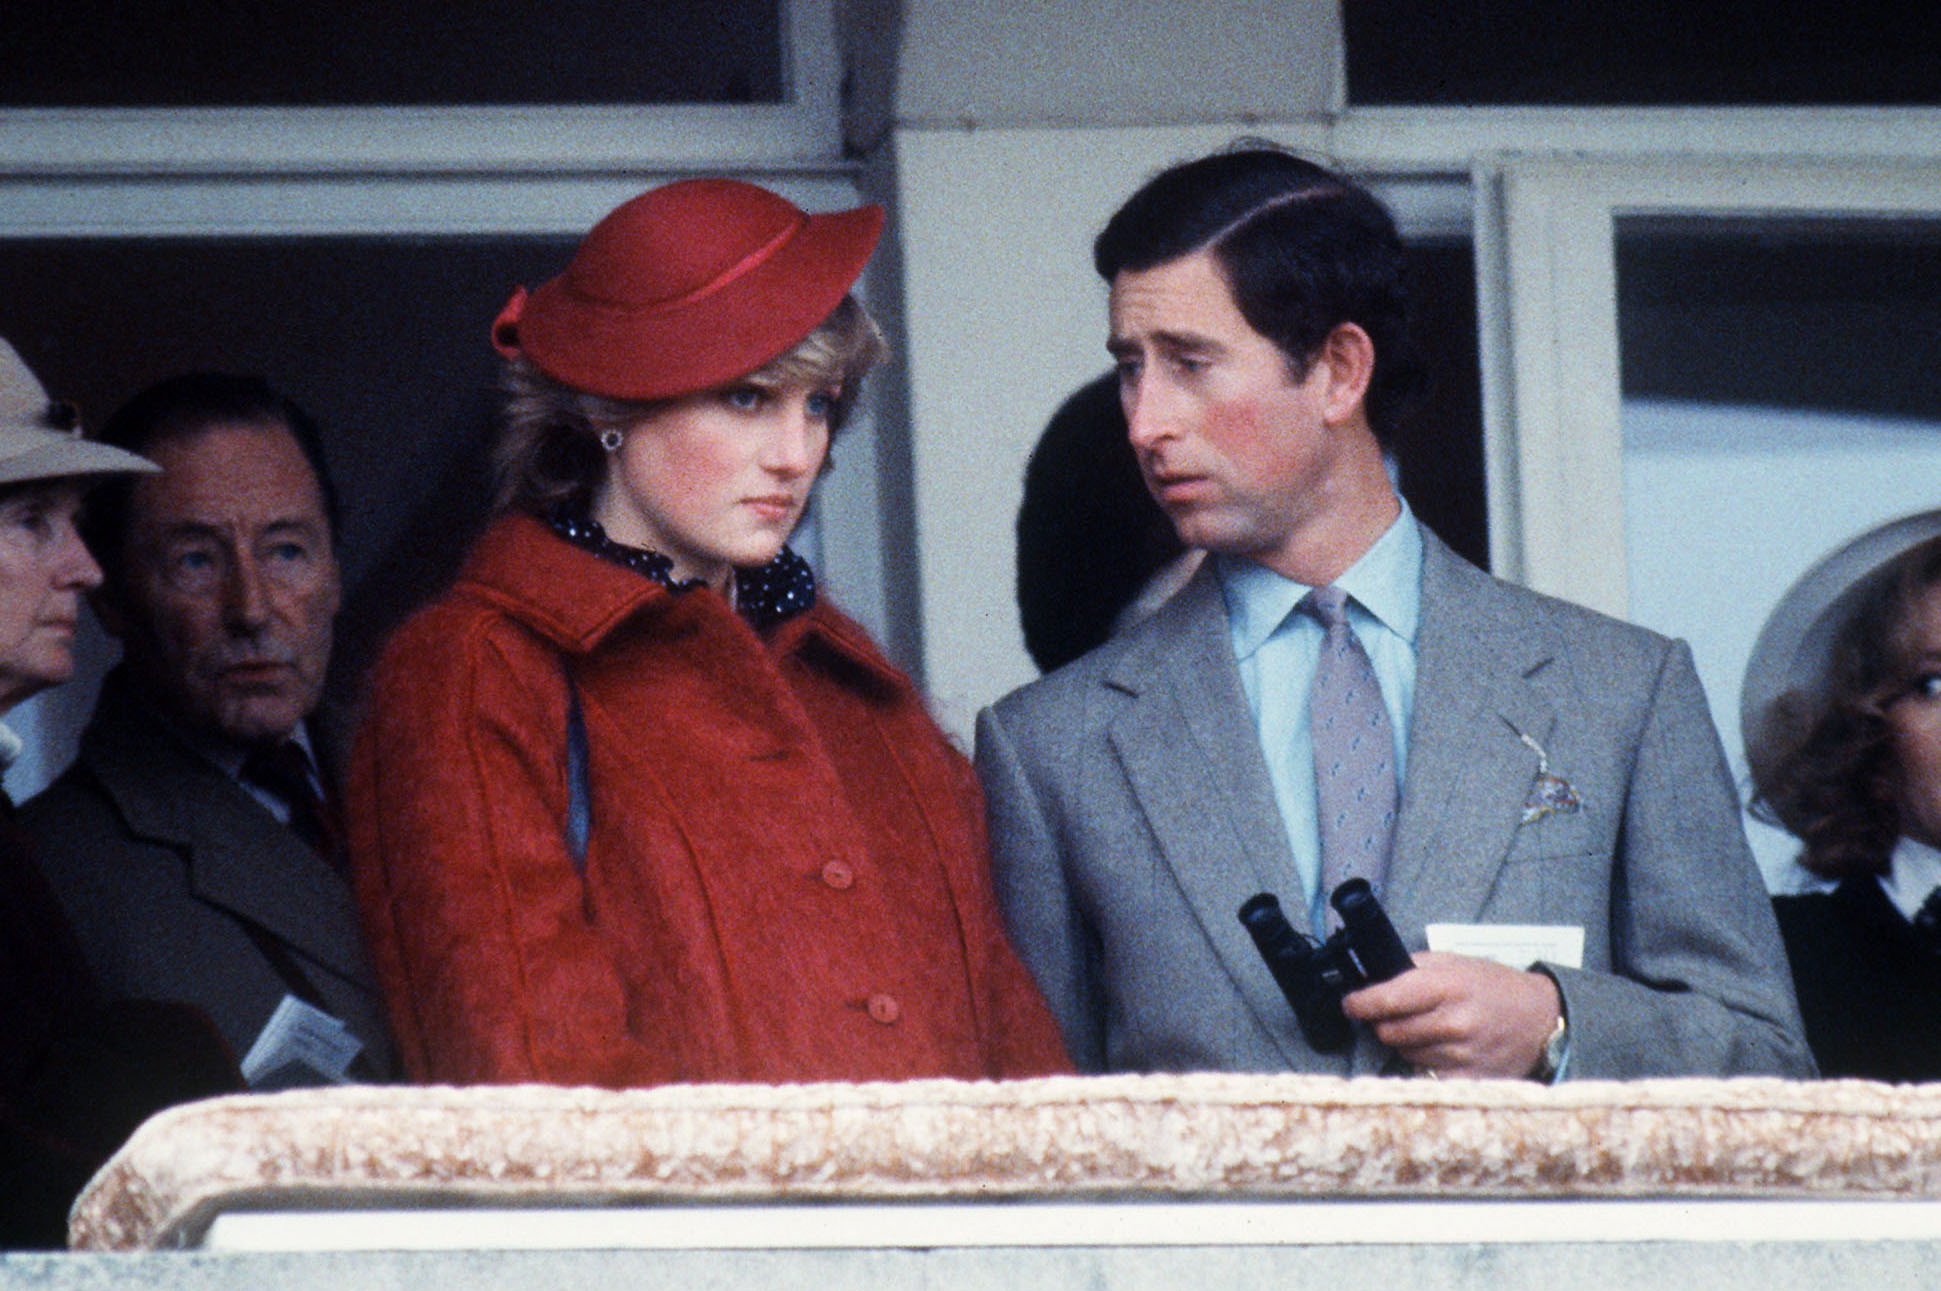 Princess Diana Pregnant And Prince Charles At Cheltenham Races on March 17, 1982 | Source: Getty Images